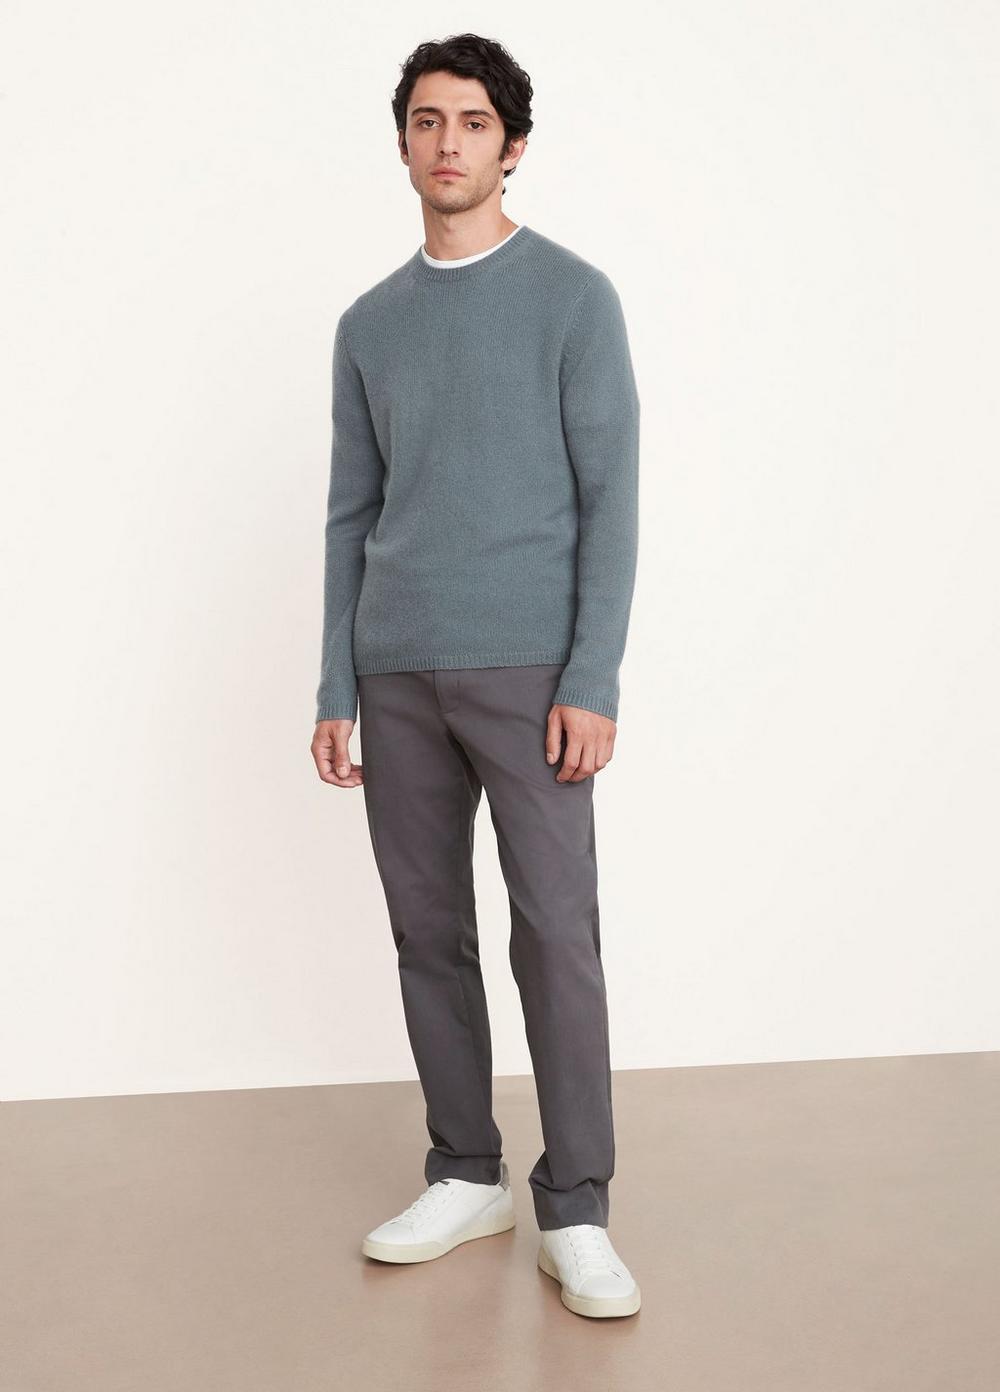 Vince Cashmere Long Sleeve Crew Neck Sweater